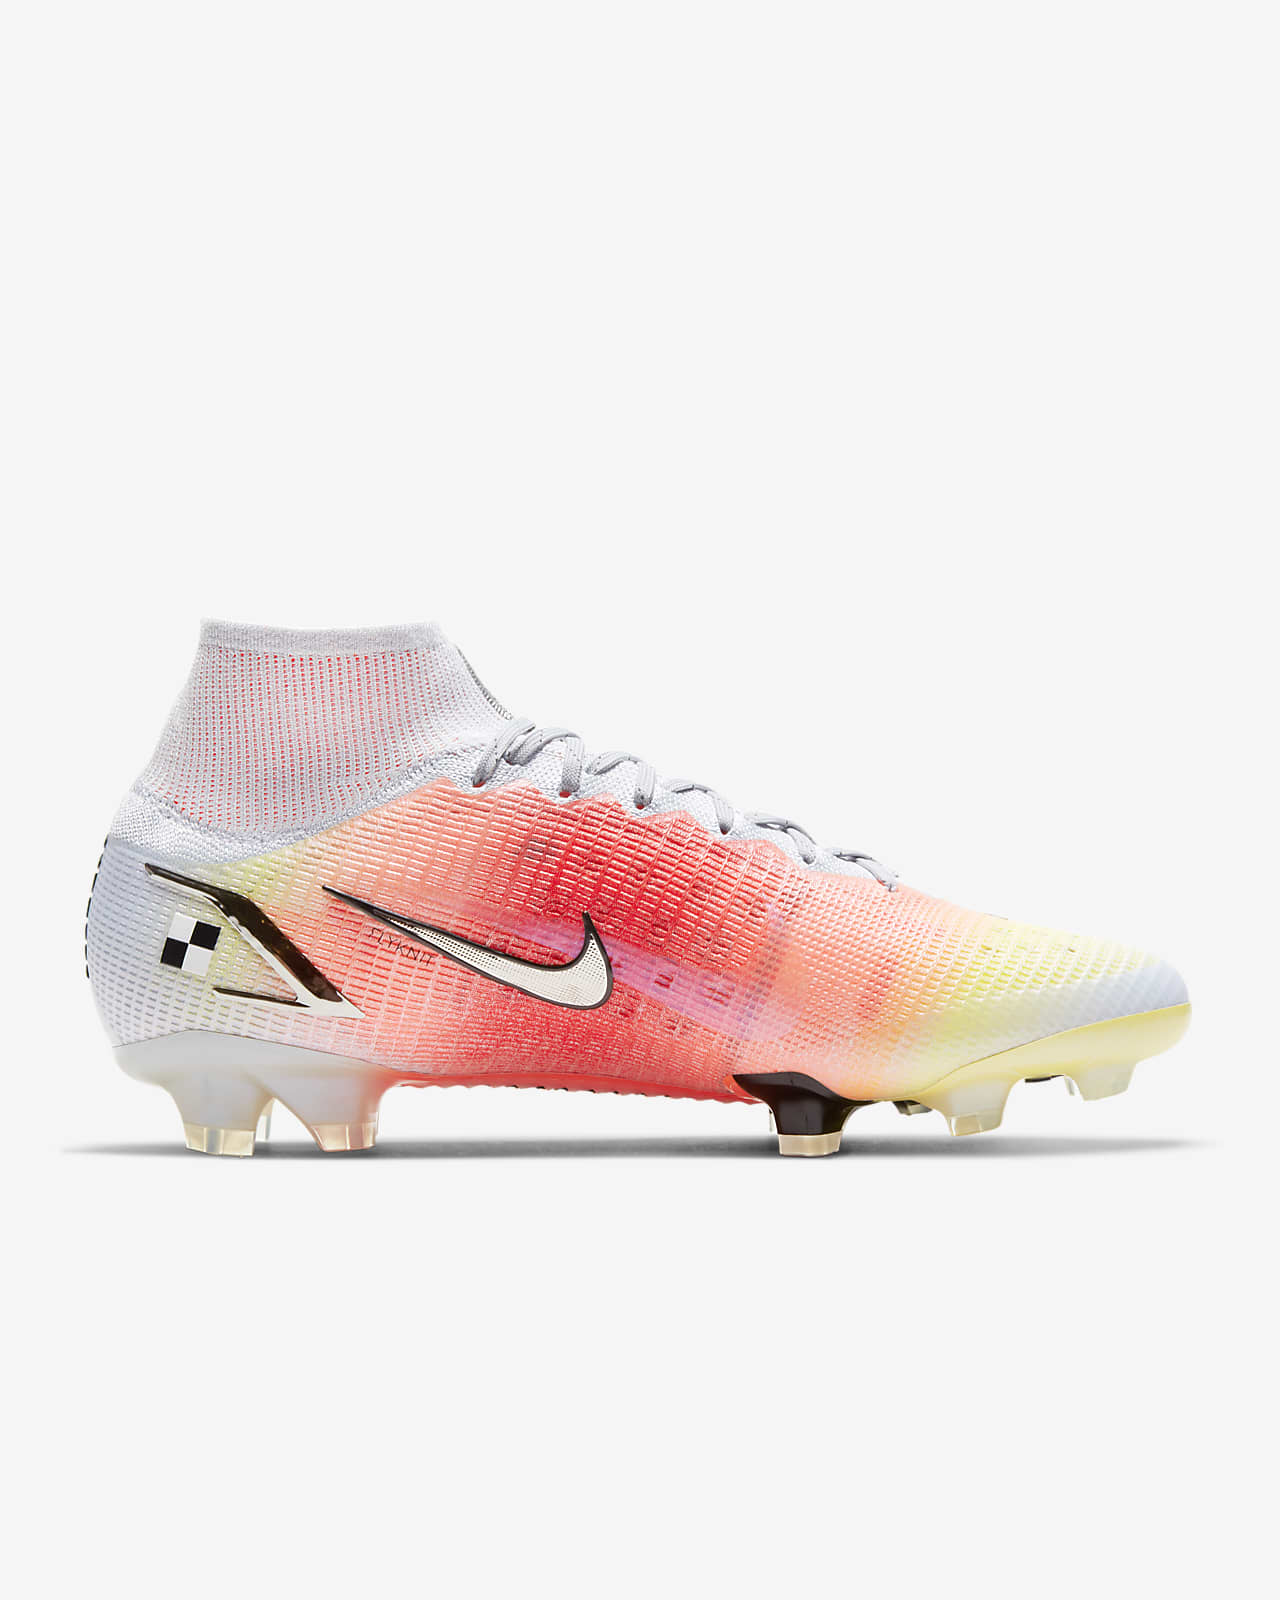 nike just do it soccer cleats